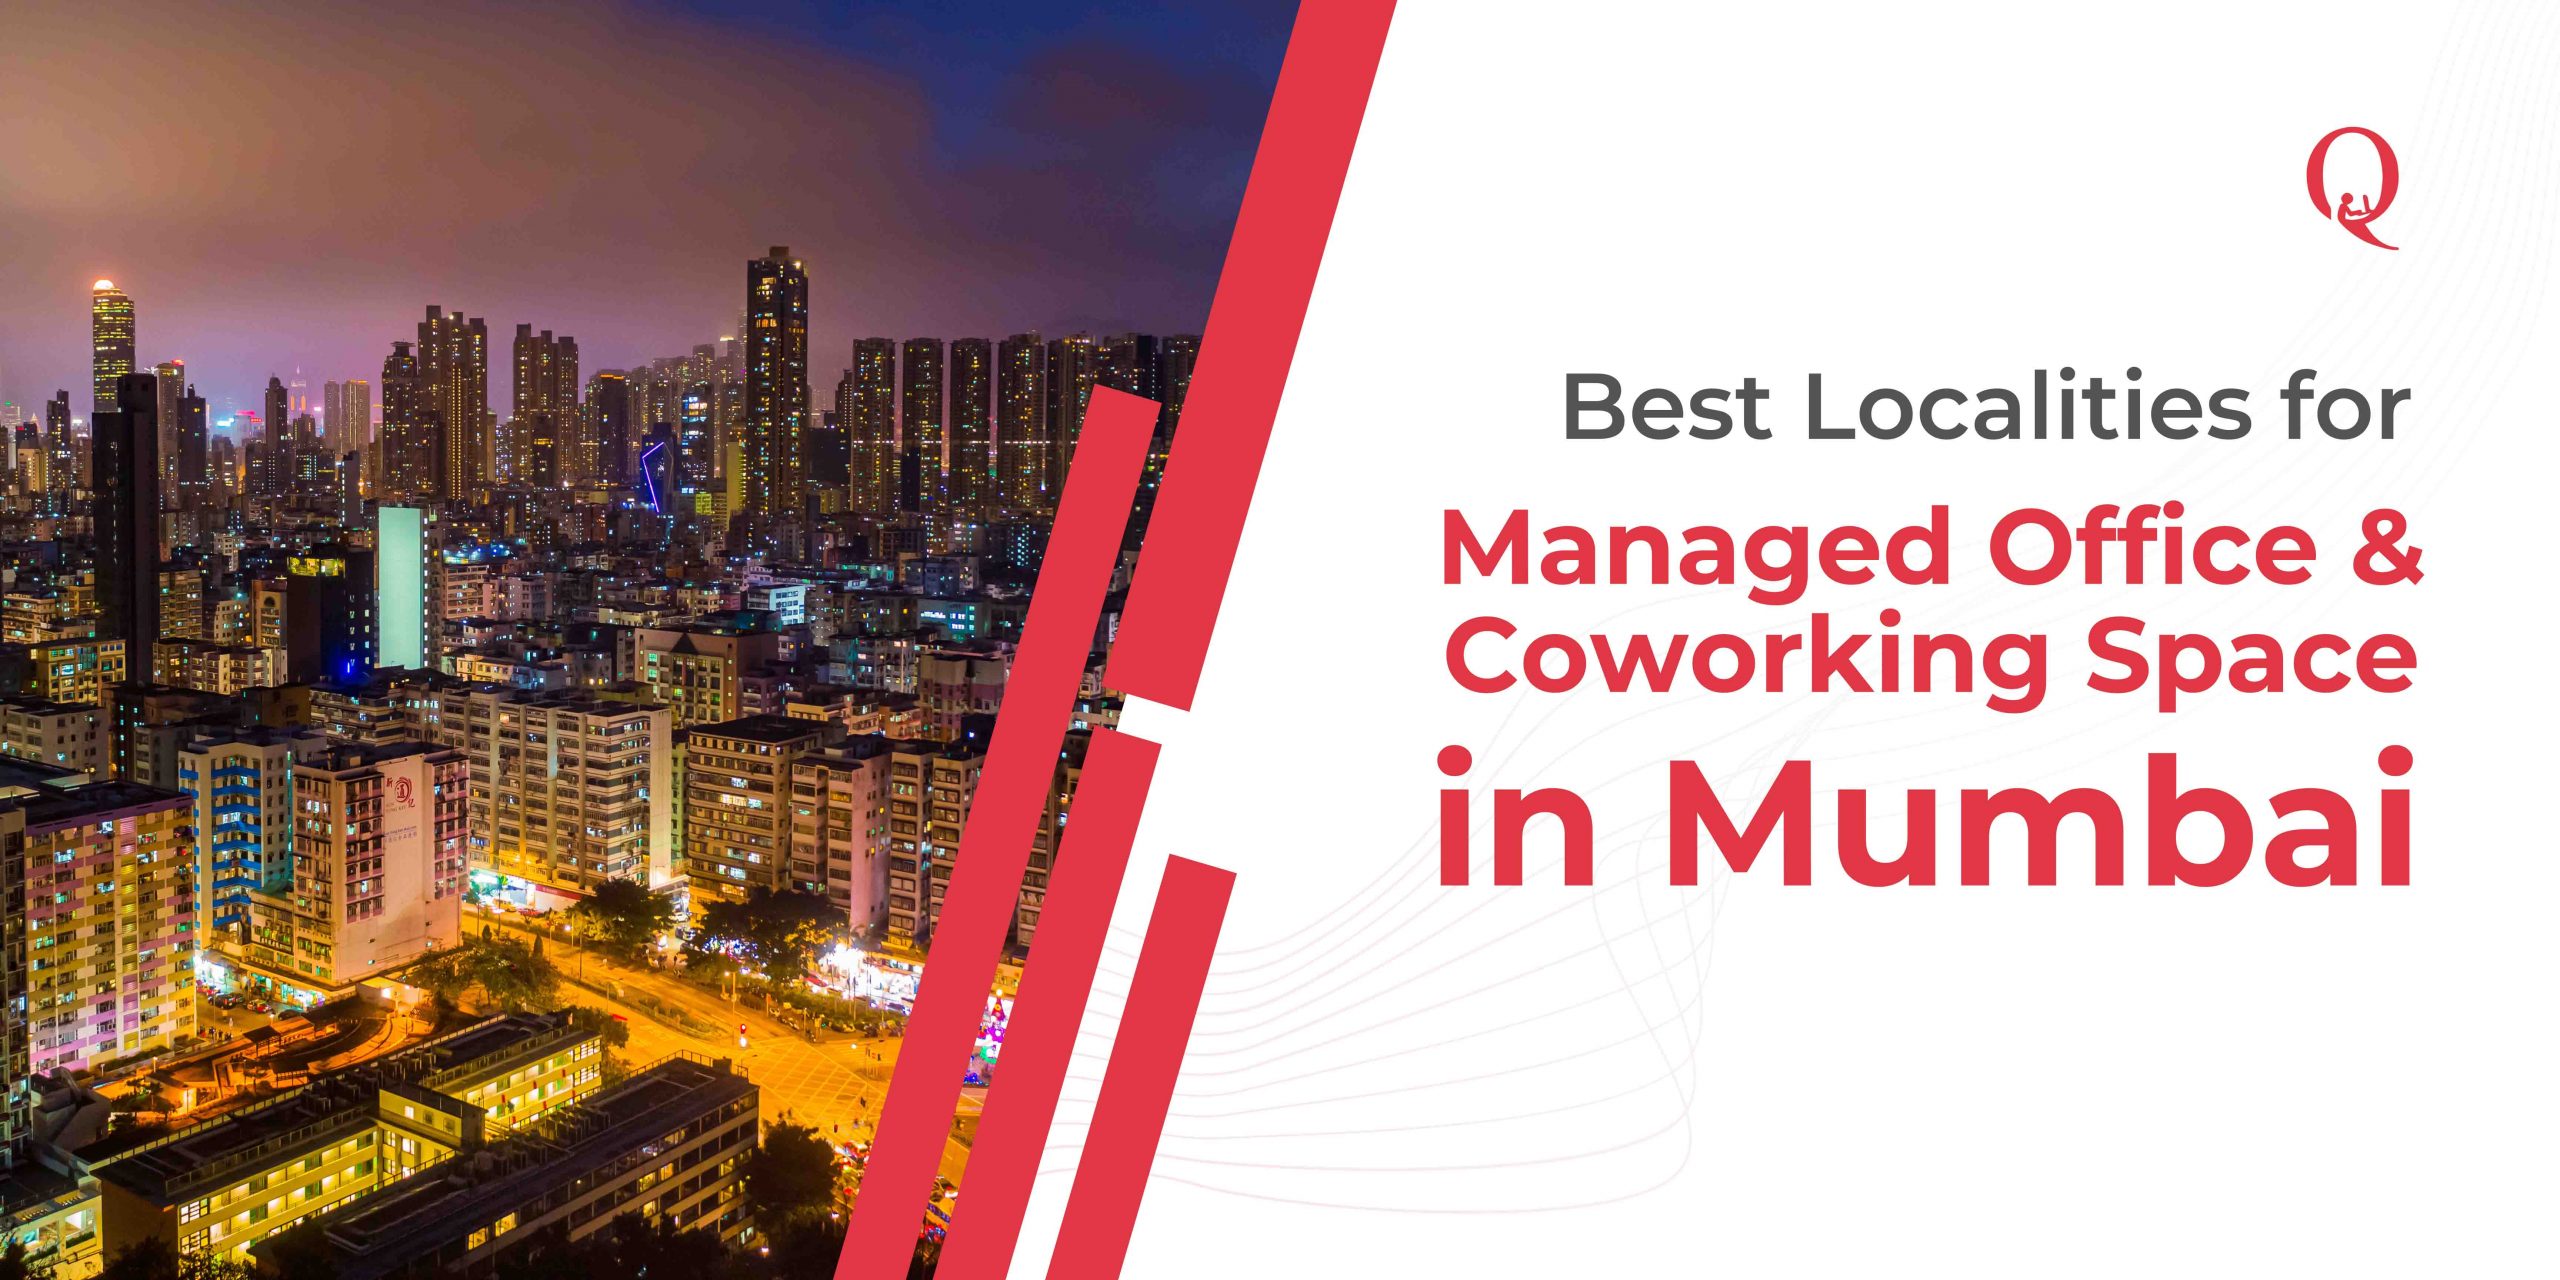 Best Localities for Managed Office & Coworking Space in Mumbai